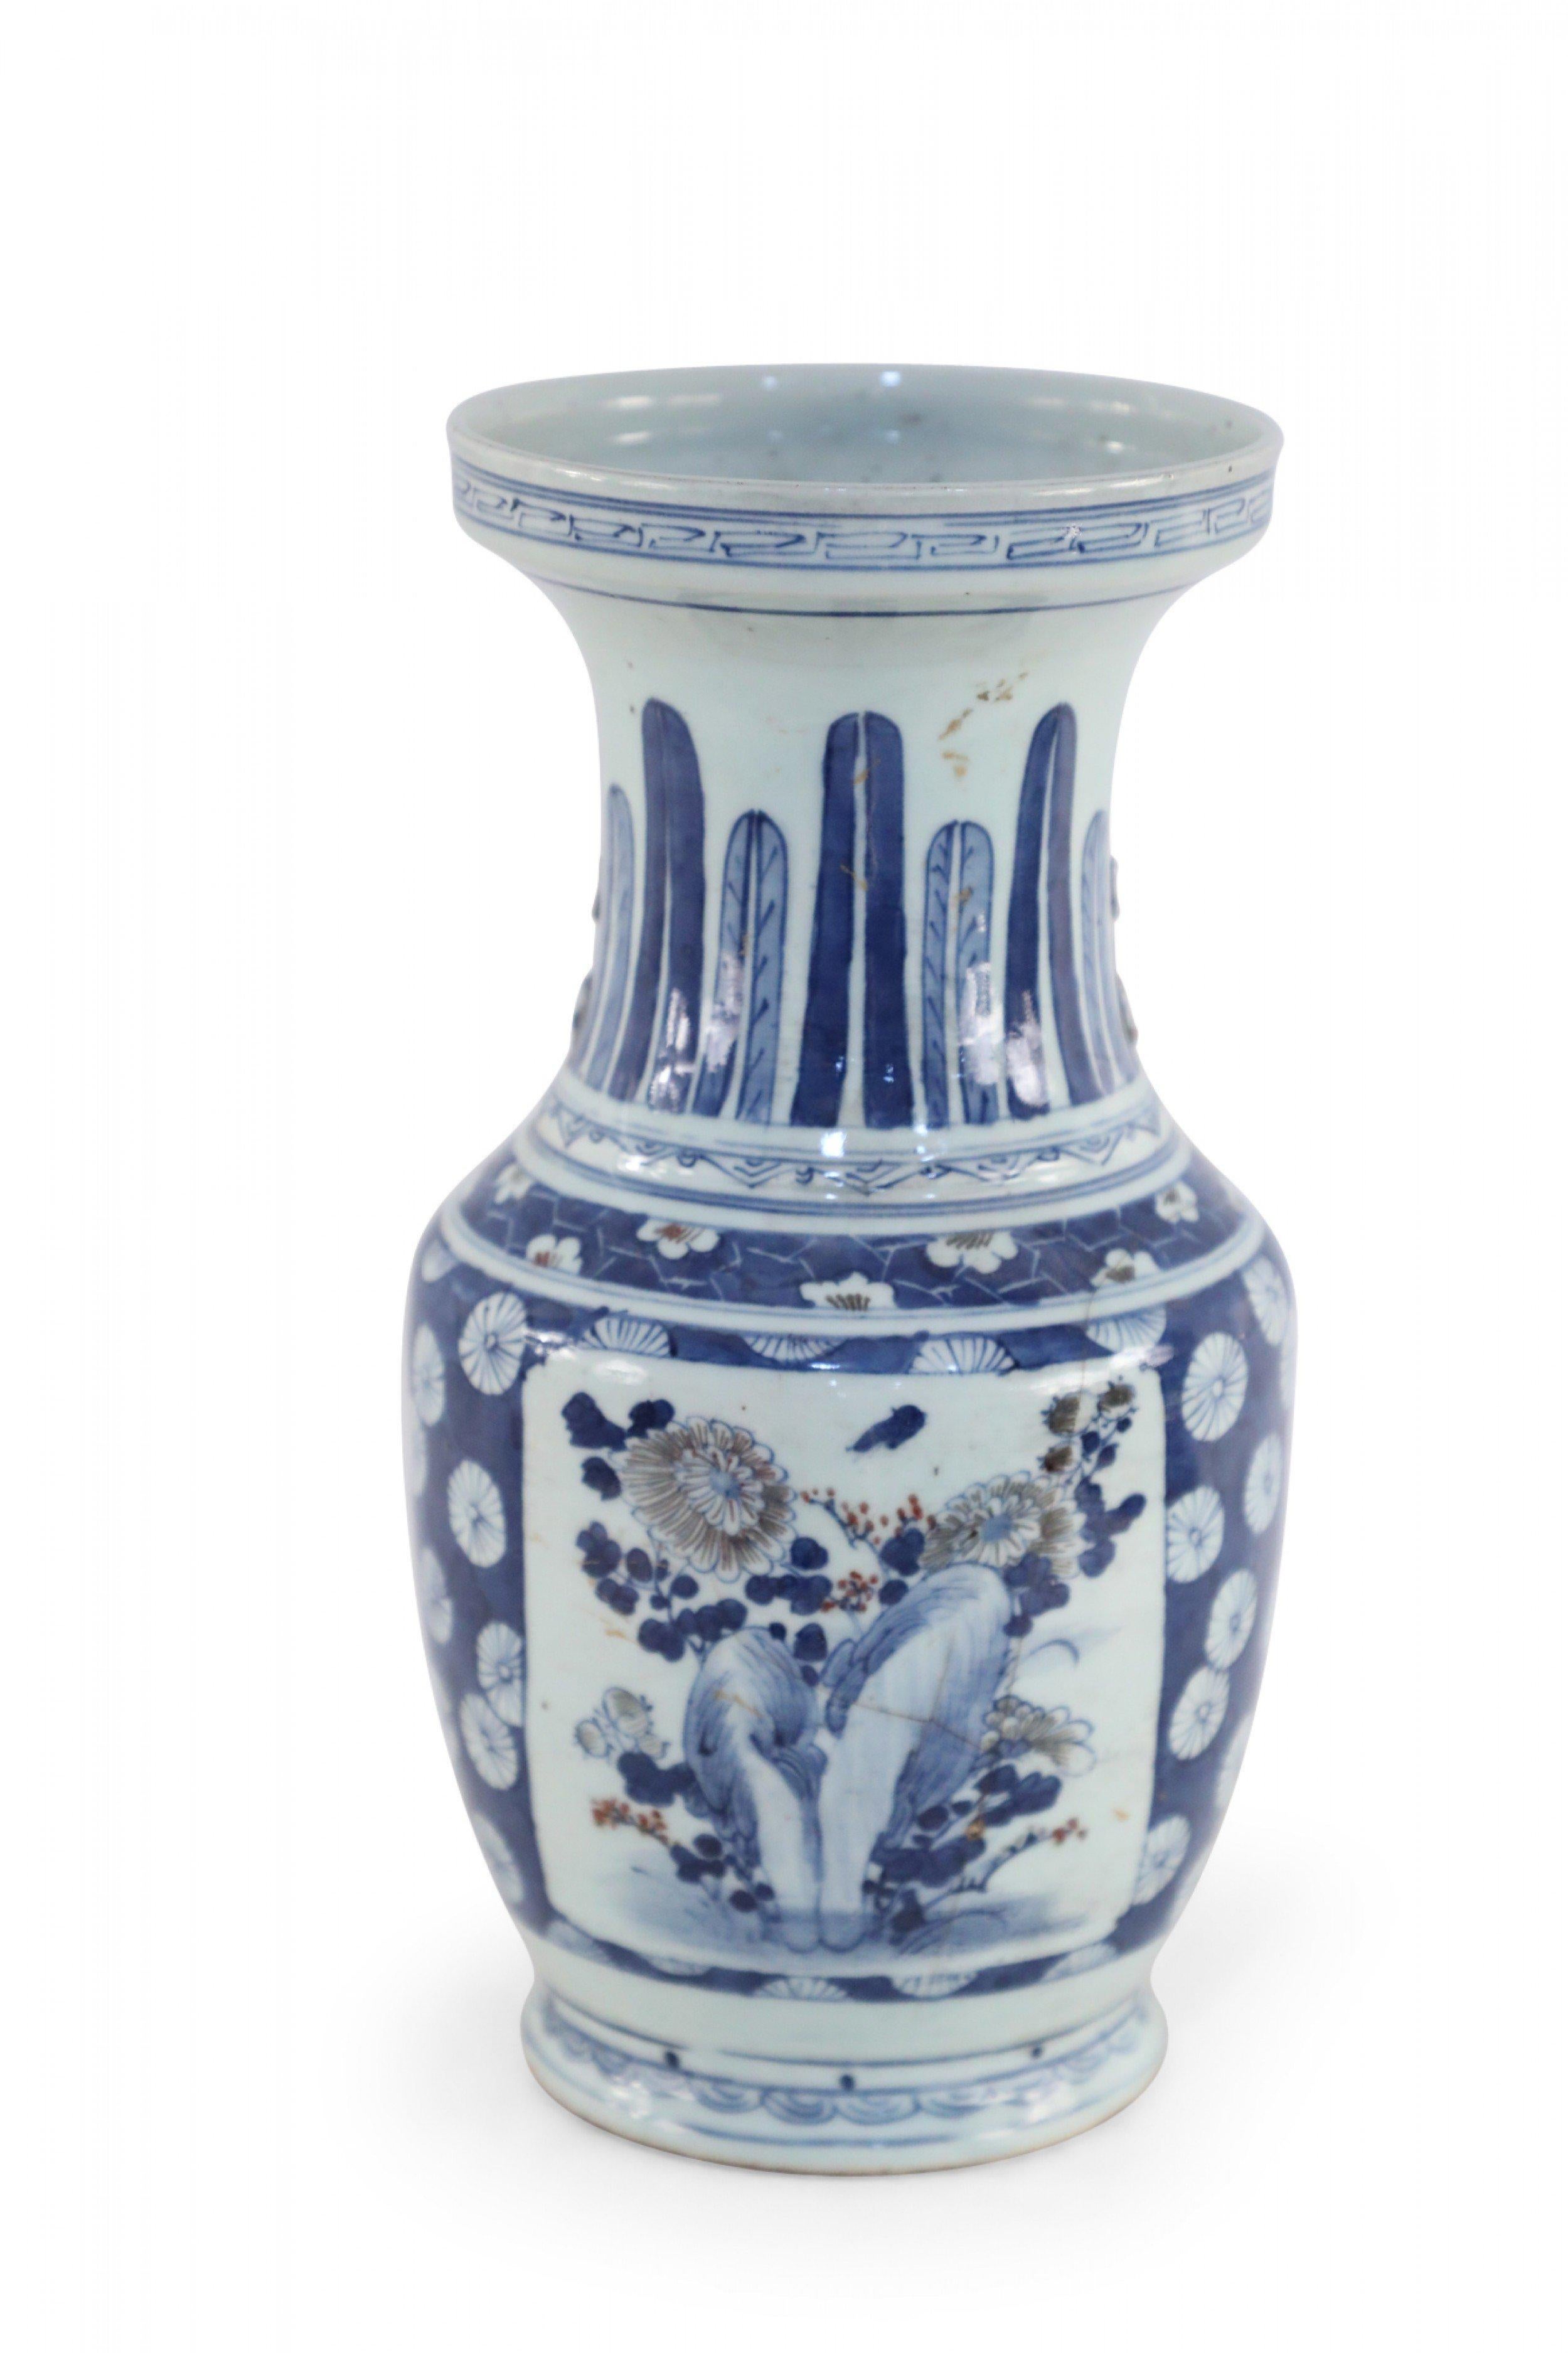 Chinese White and Blue Floral and Feather Motif Porcelain Urn For Sale 4